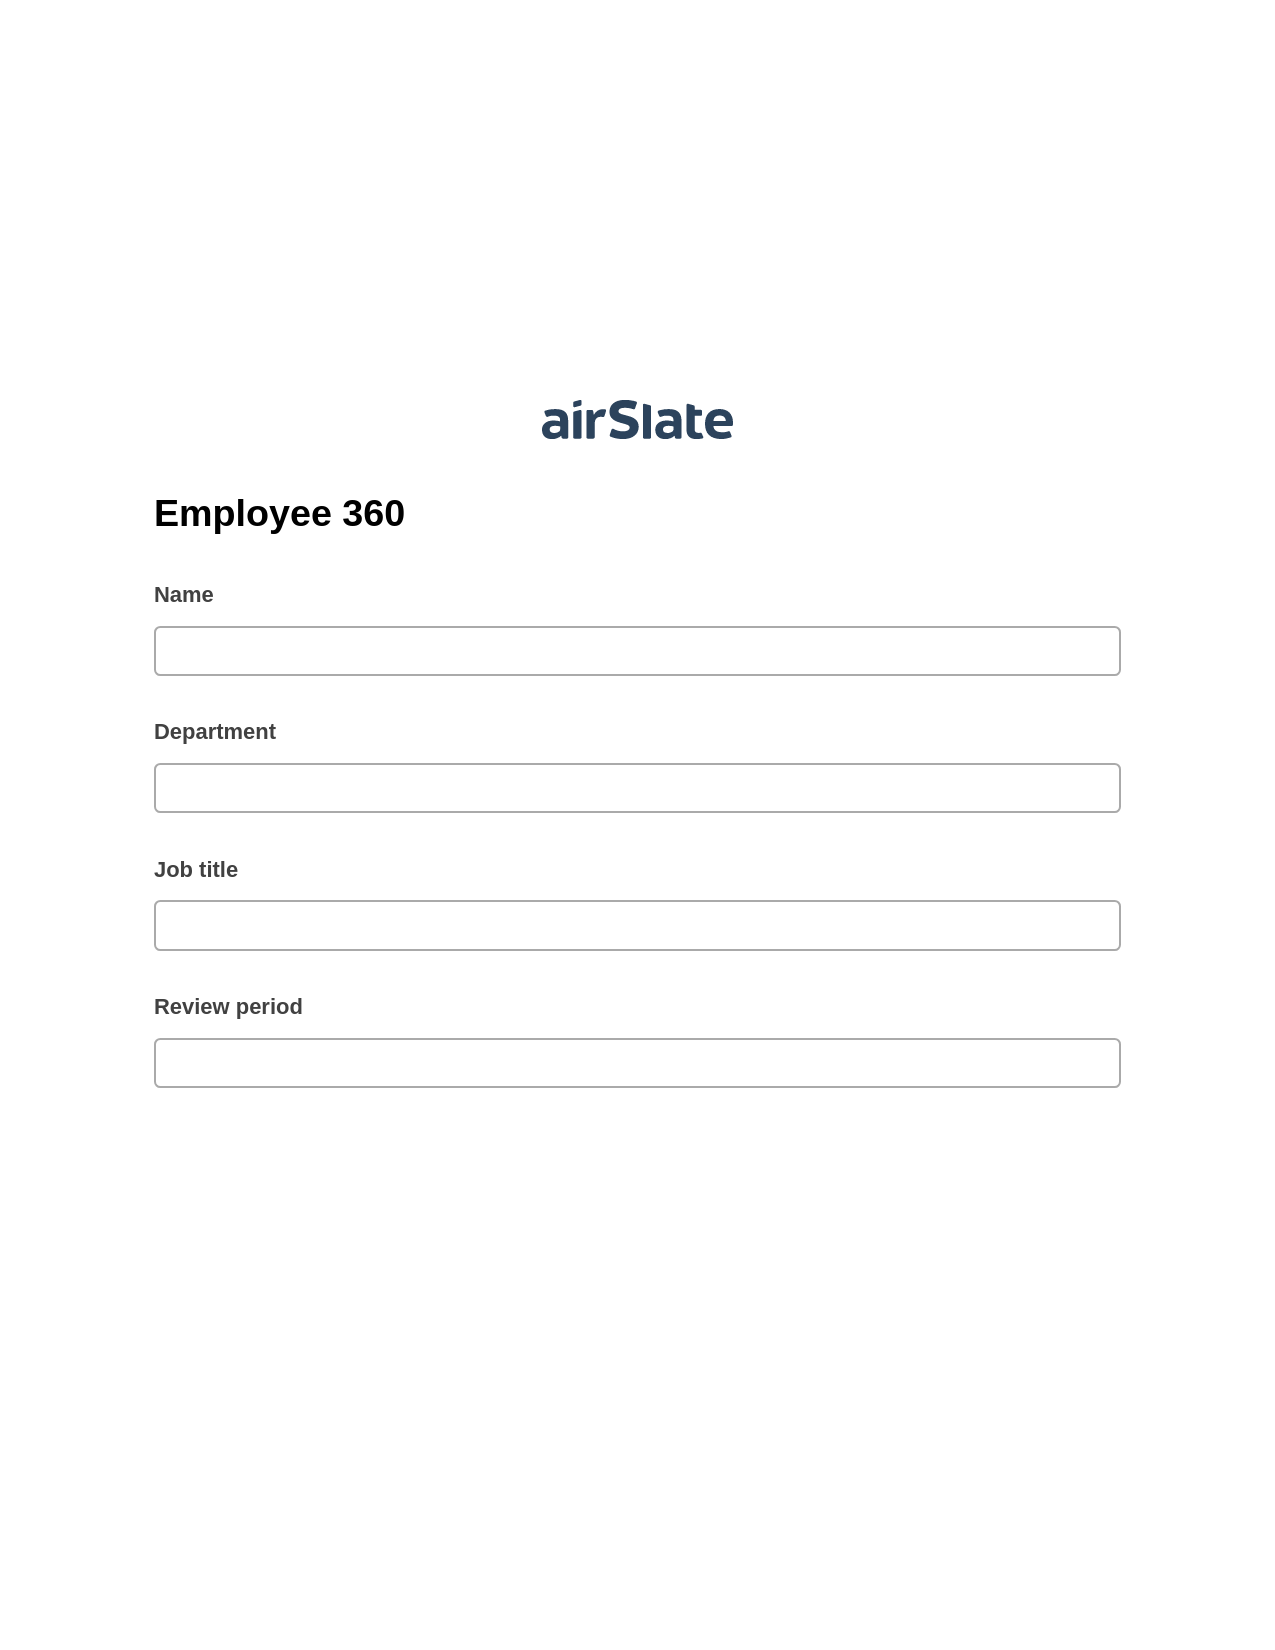 Employee 360 Pre-fill from MS Dynamics 365 Records, Google Calendar Bot, Export to Smartsheet